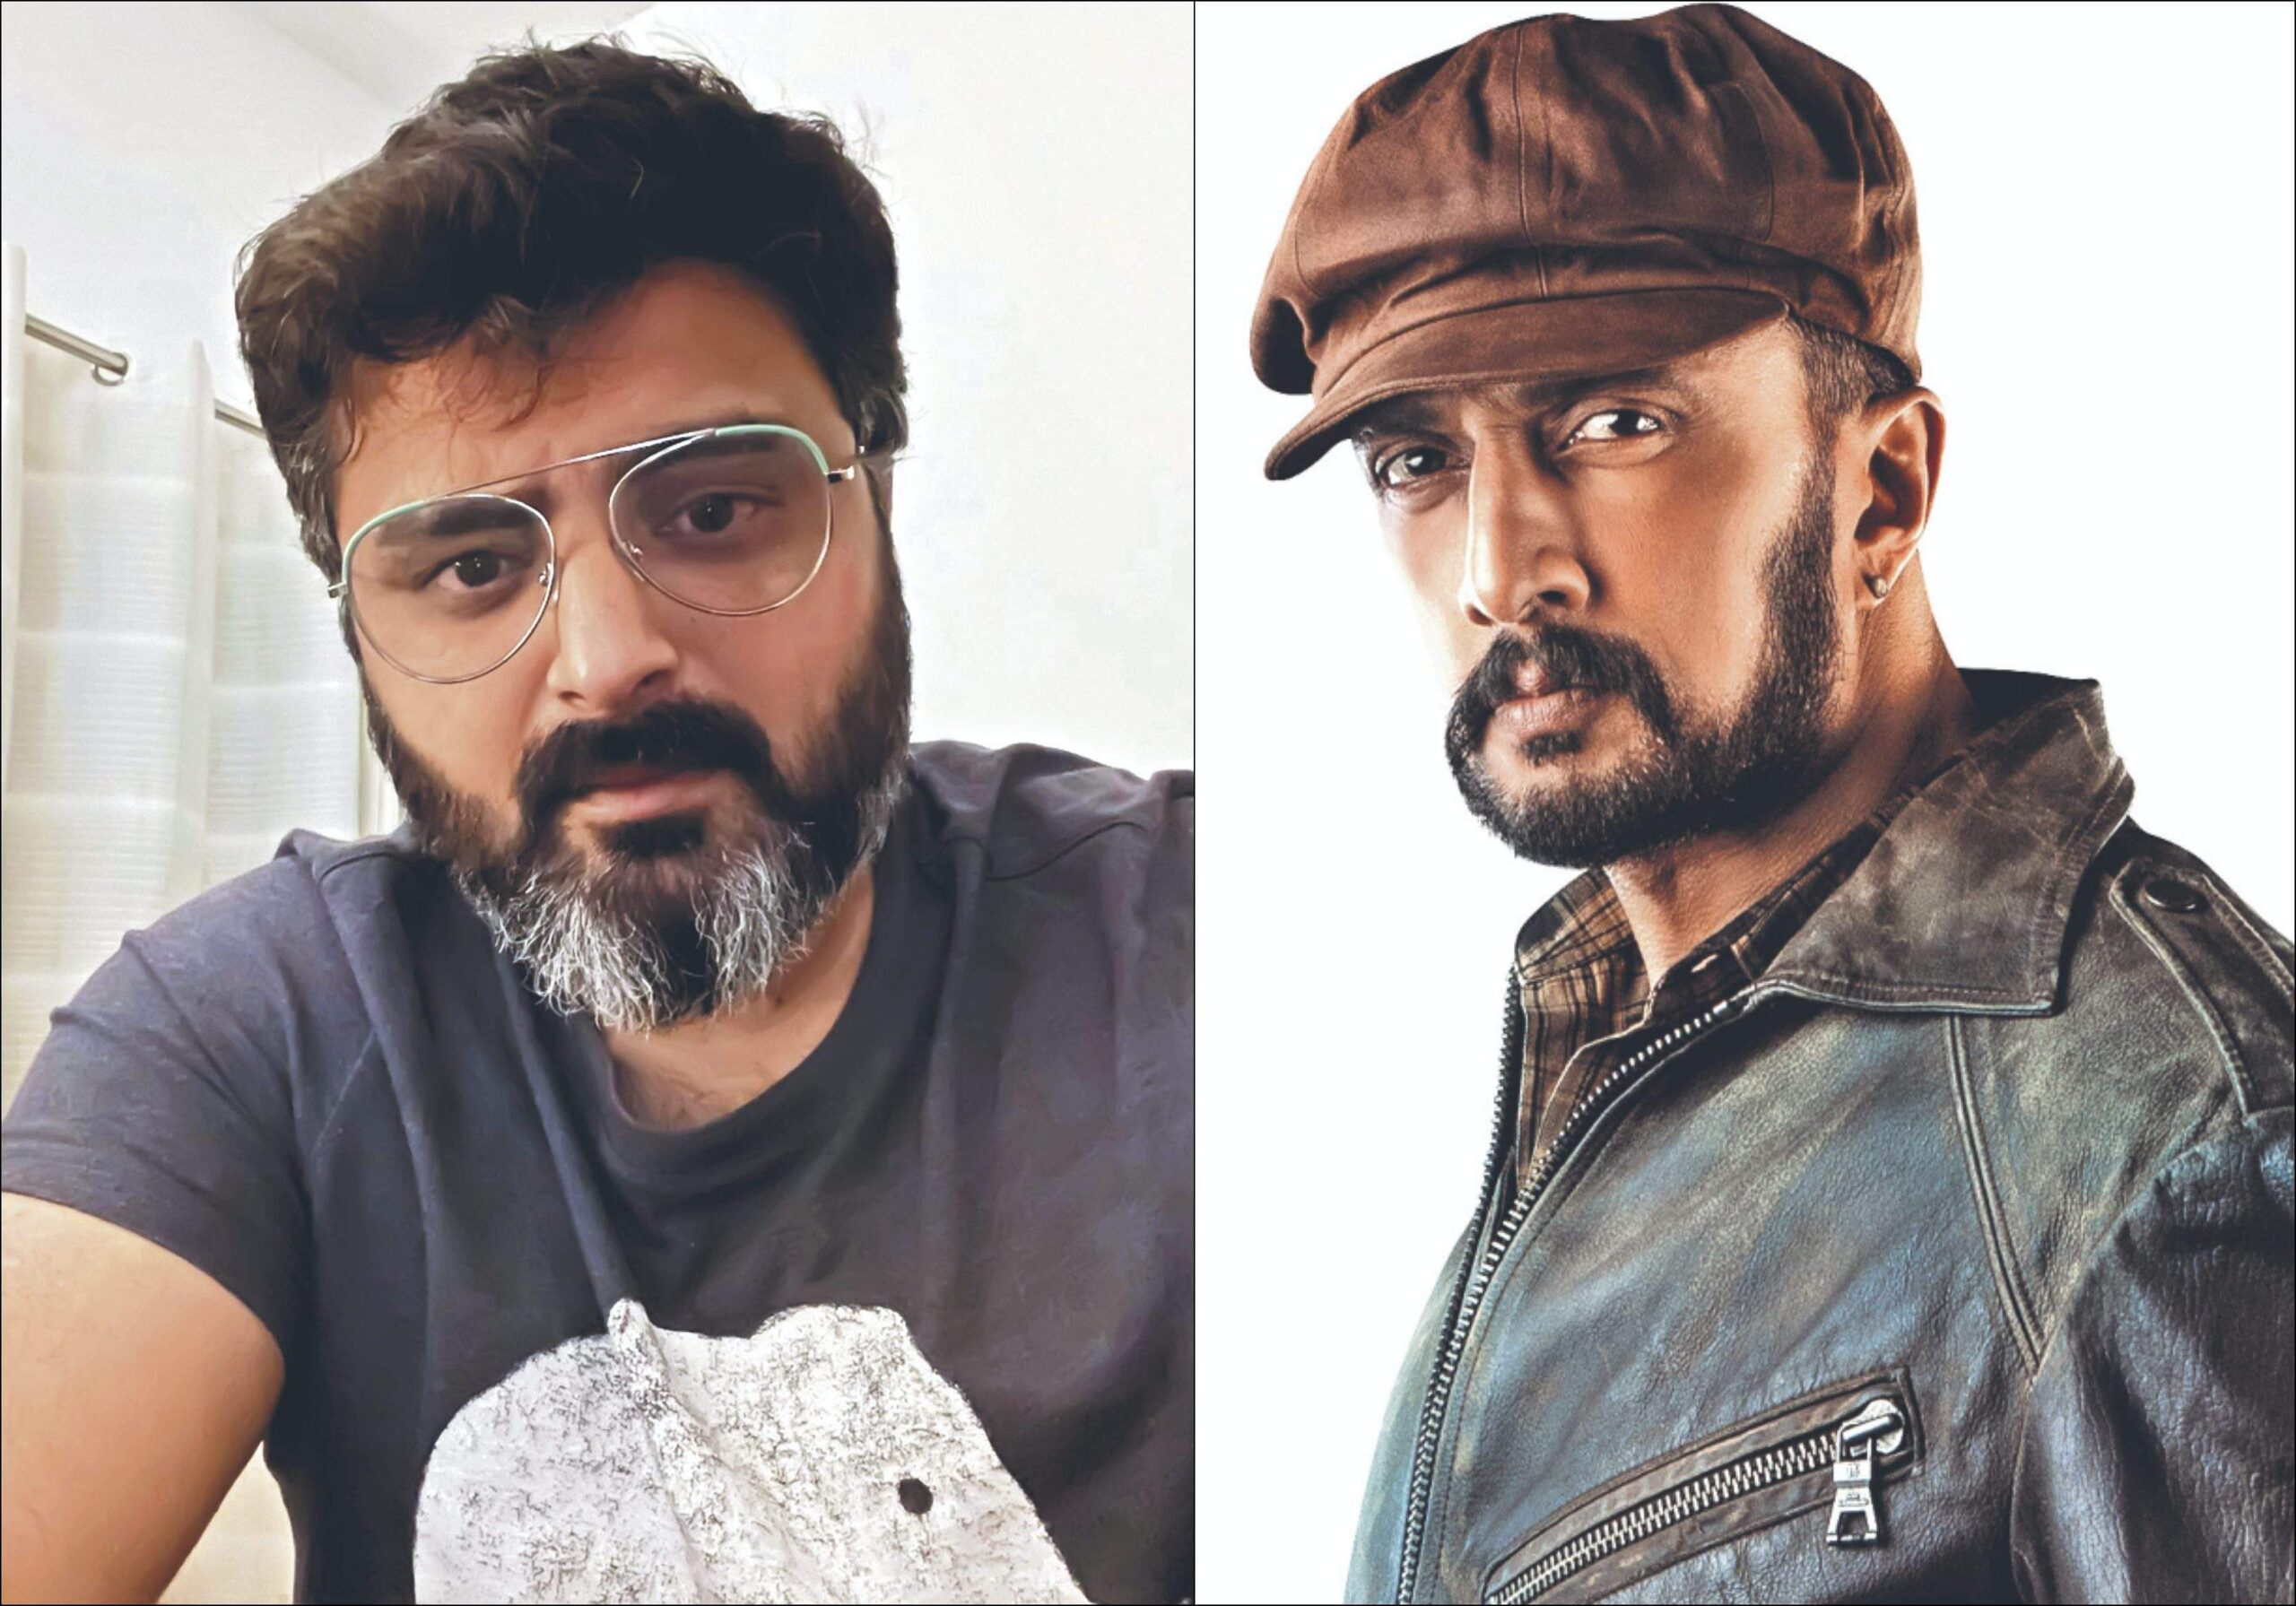 What's next for Sudeep and Anup Bhandari after Vikrant Rona